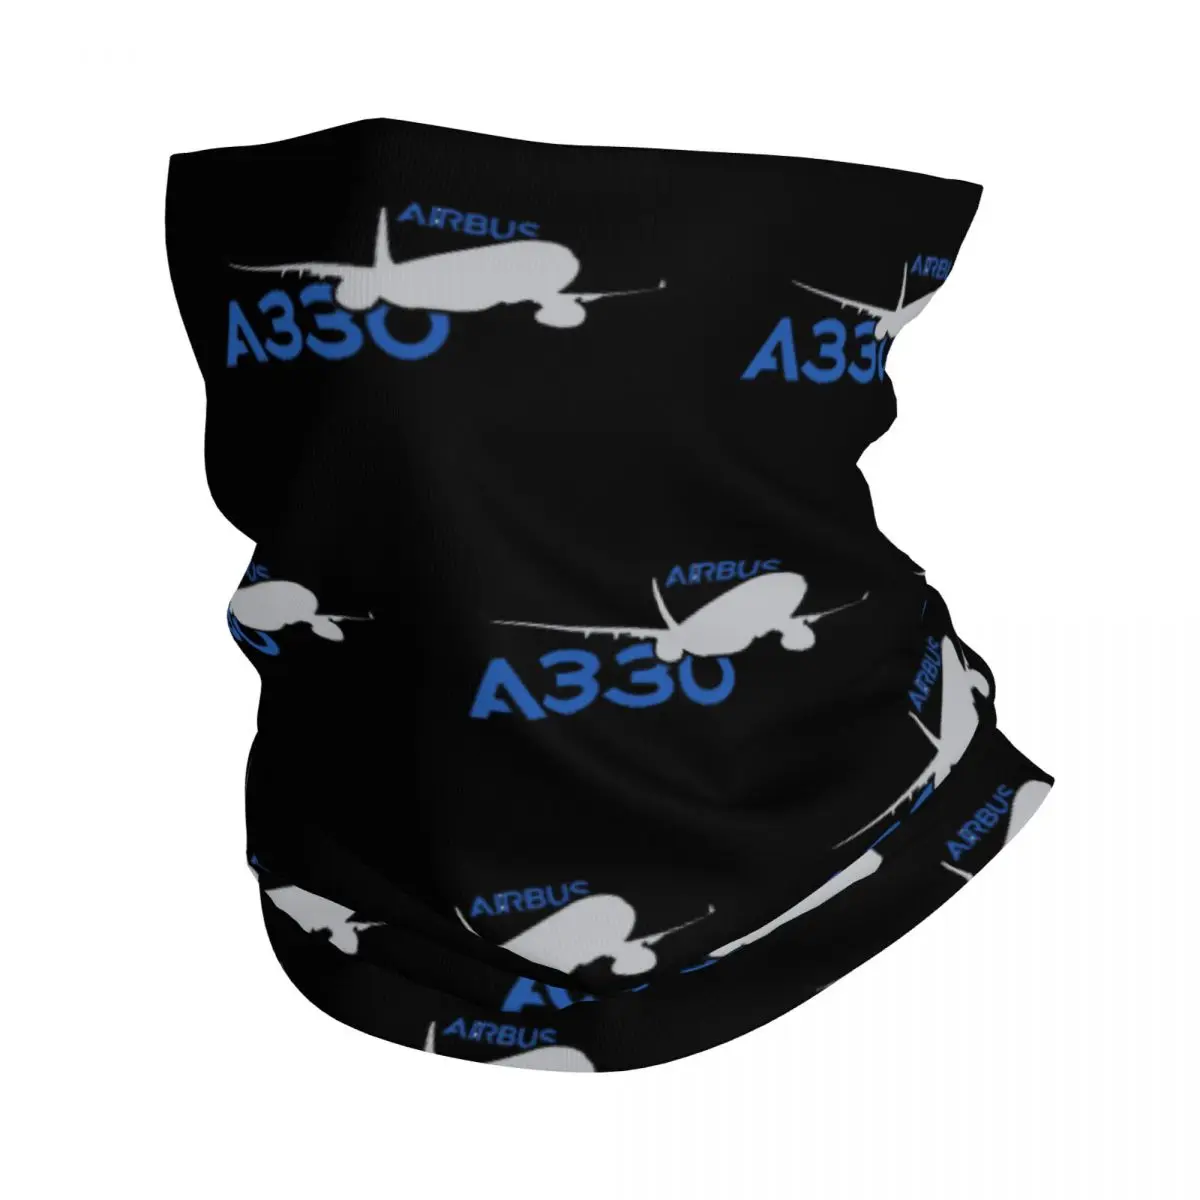 

Airbus A330 Airline Airplane Bandana Neck Gaiter Printed Balaclavas Mask Scarf Warm Cycling Hiking Unisex Adult Breathable